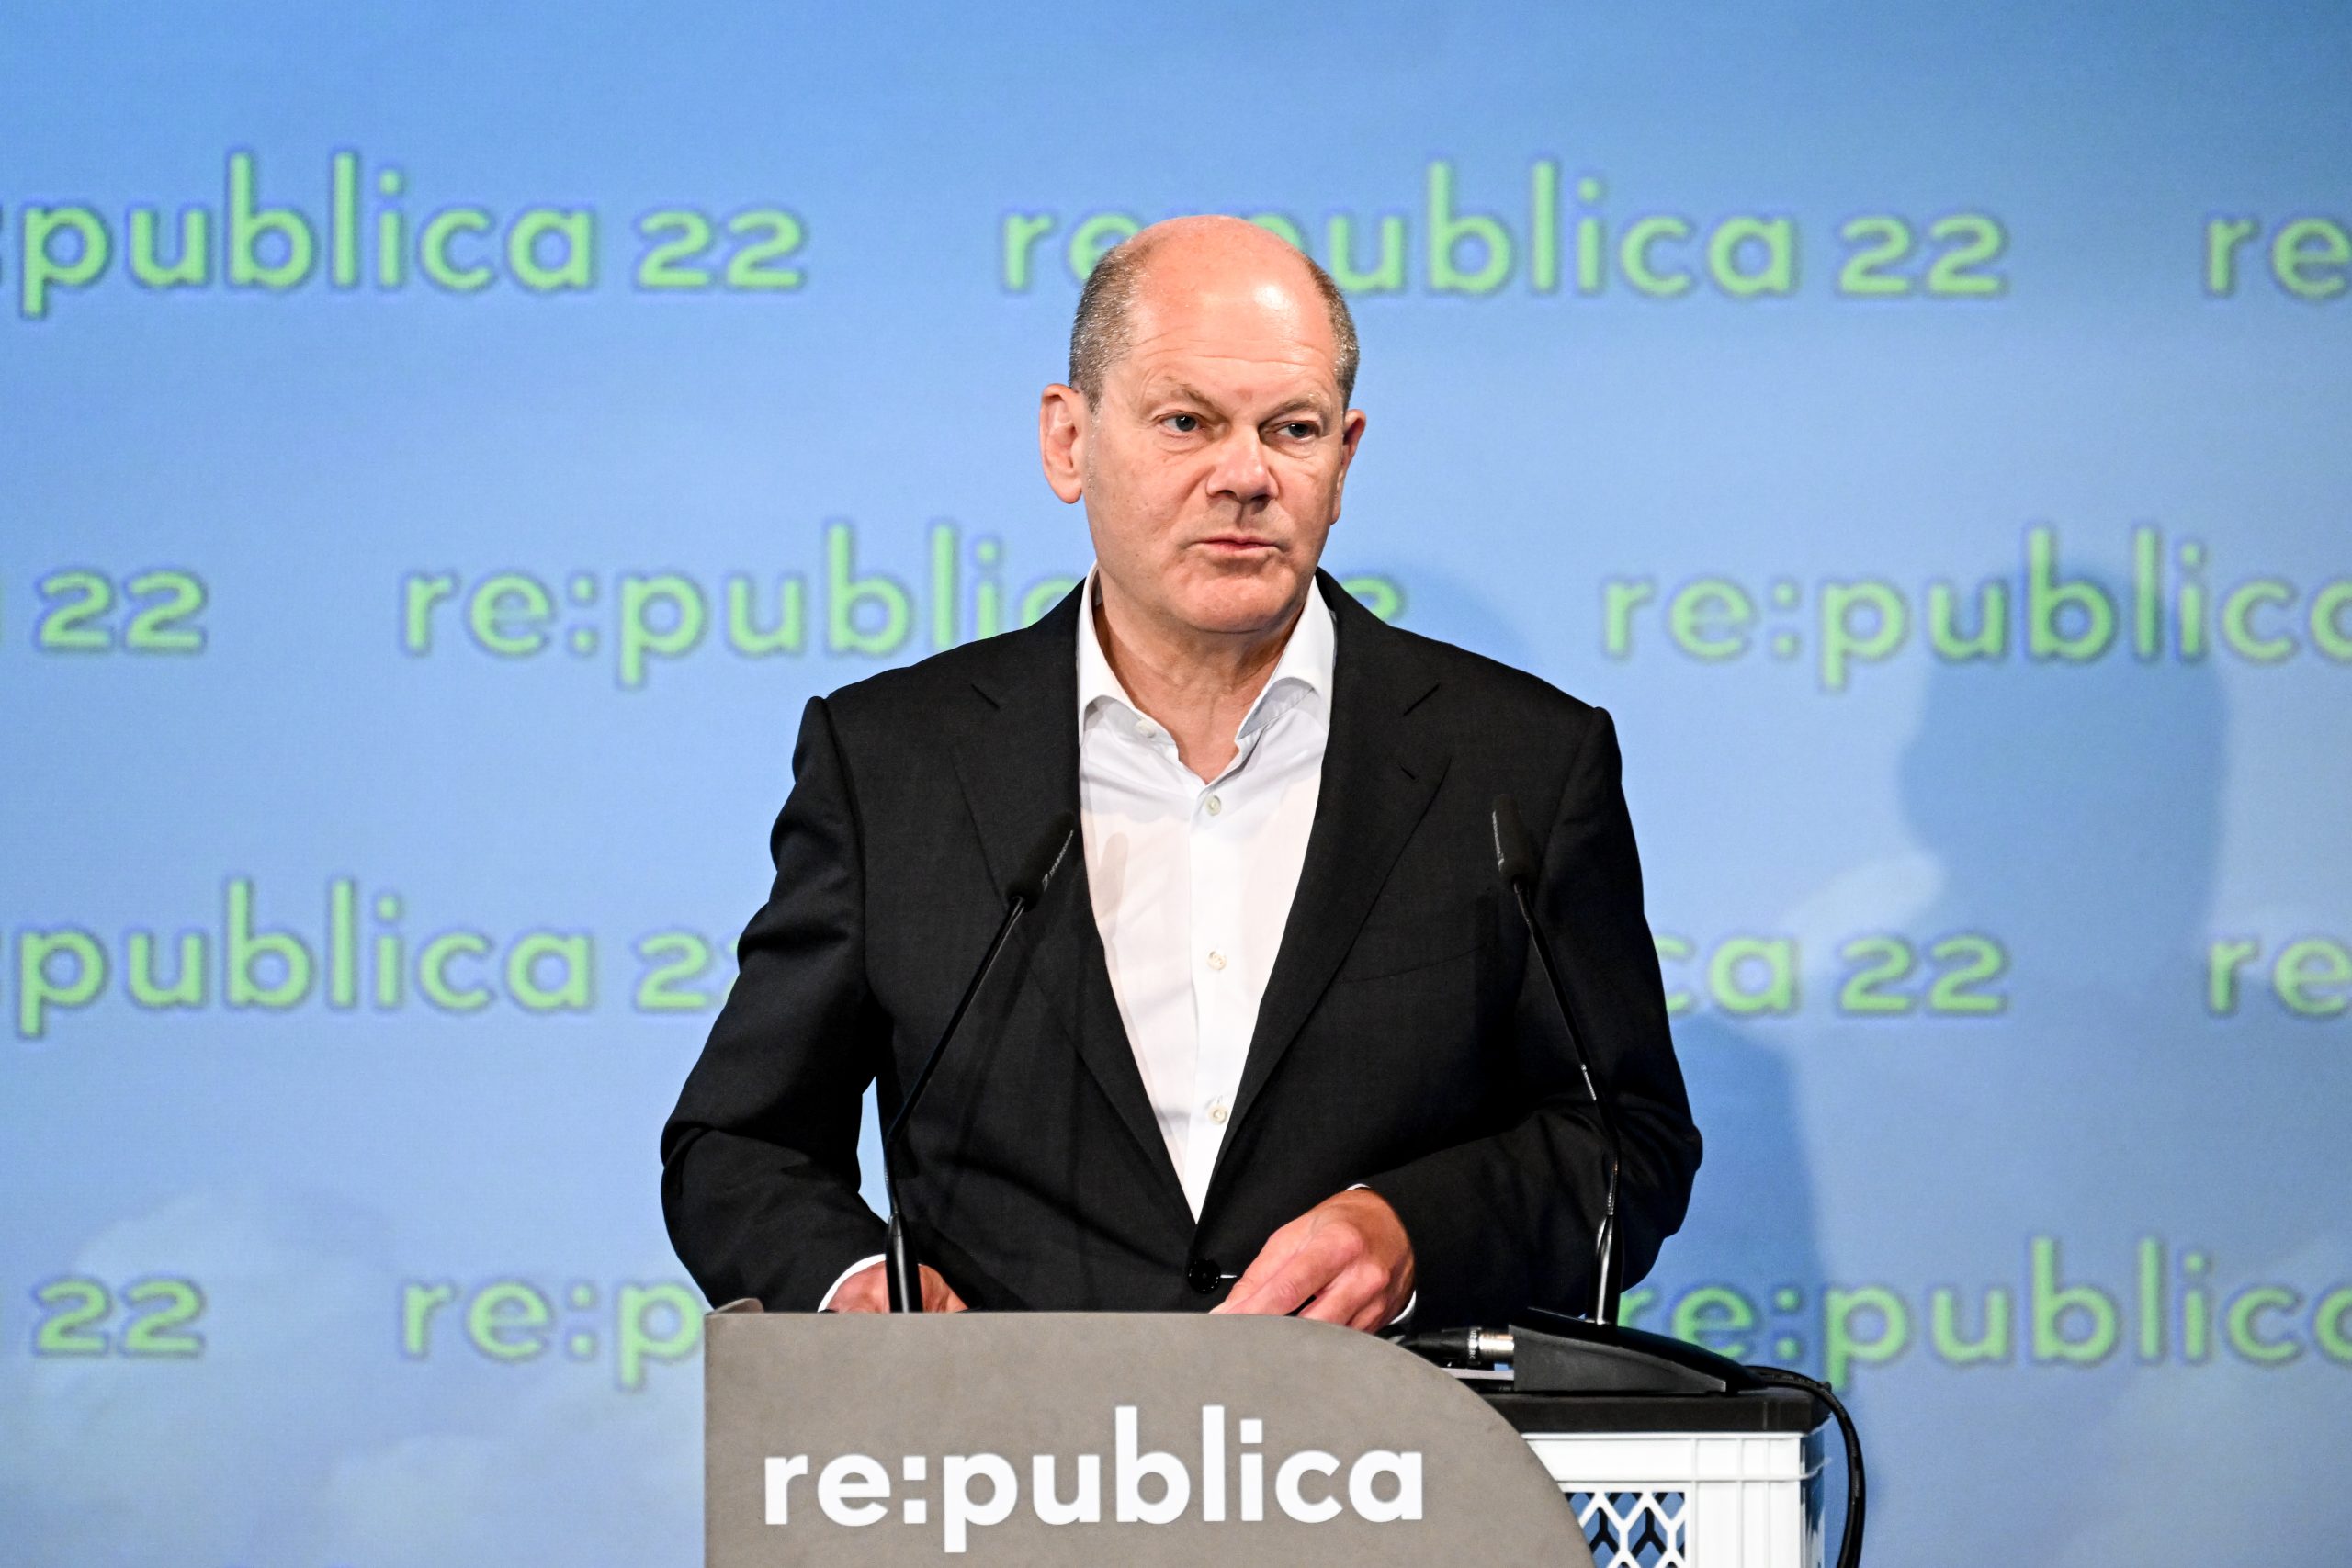 epa10003982 German Chancellor Olaf Scholz speaks at the 're:publica 22’ digital conference in Berlin, Germany, 09 June 2022. The 're:publica' is one of the largest conferences about digital culture, blogs, social media and information society in the world. It takes place annually in Berlin and runs from 08 to 10 June.  EPA/FILIP SINGER